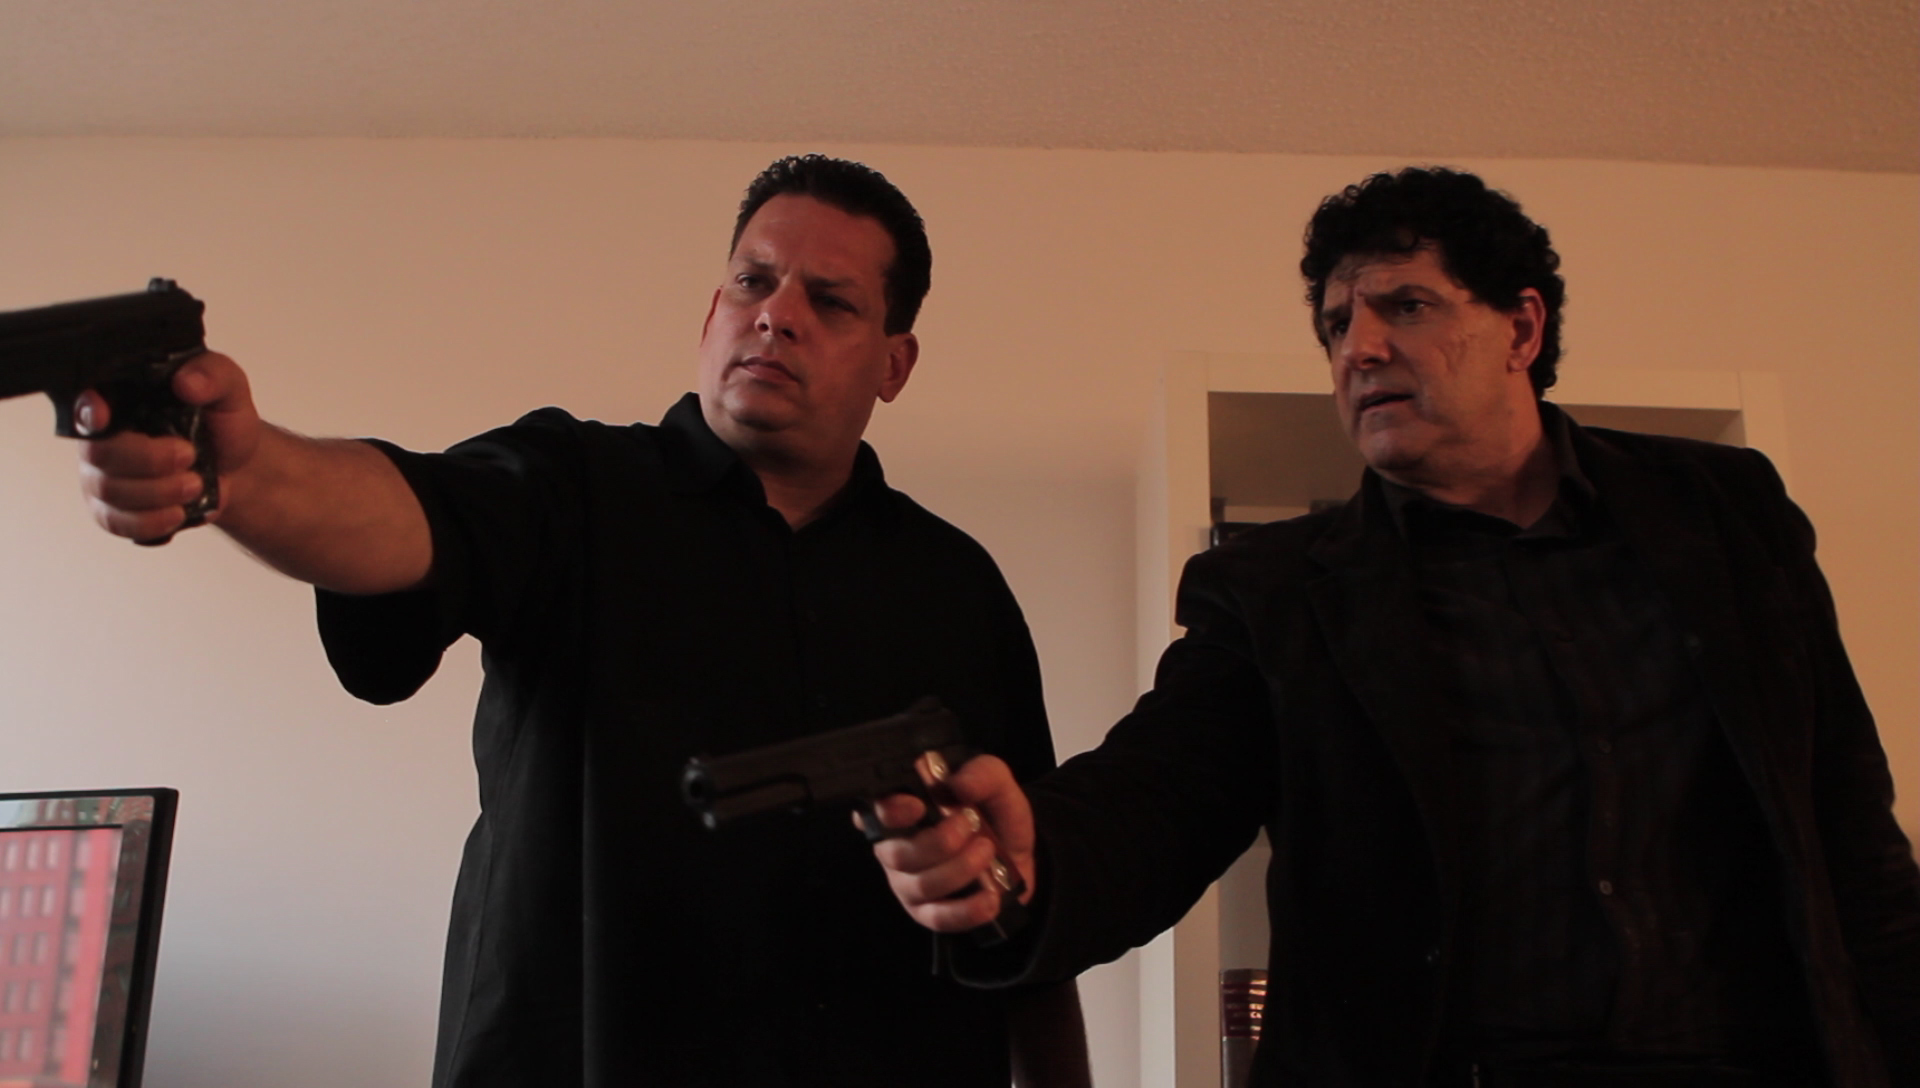 Still of Sal Amore (Dough Boys, Krackoon duology) and Rich Rossi in Night Bird